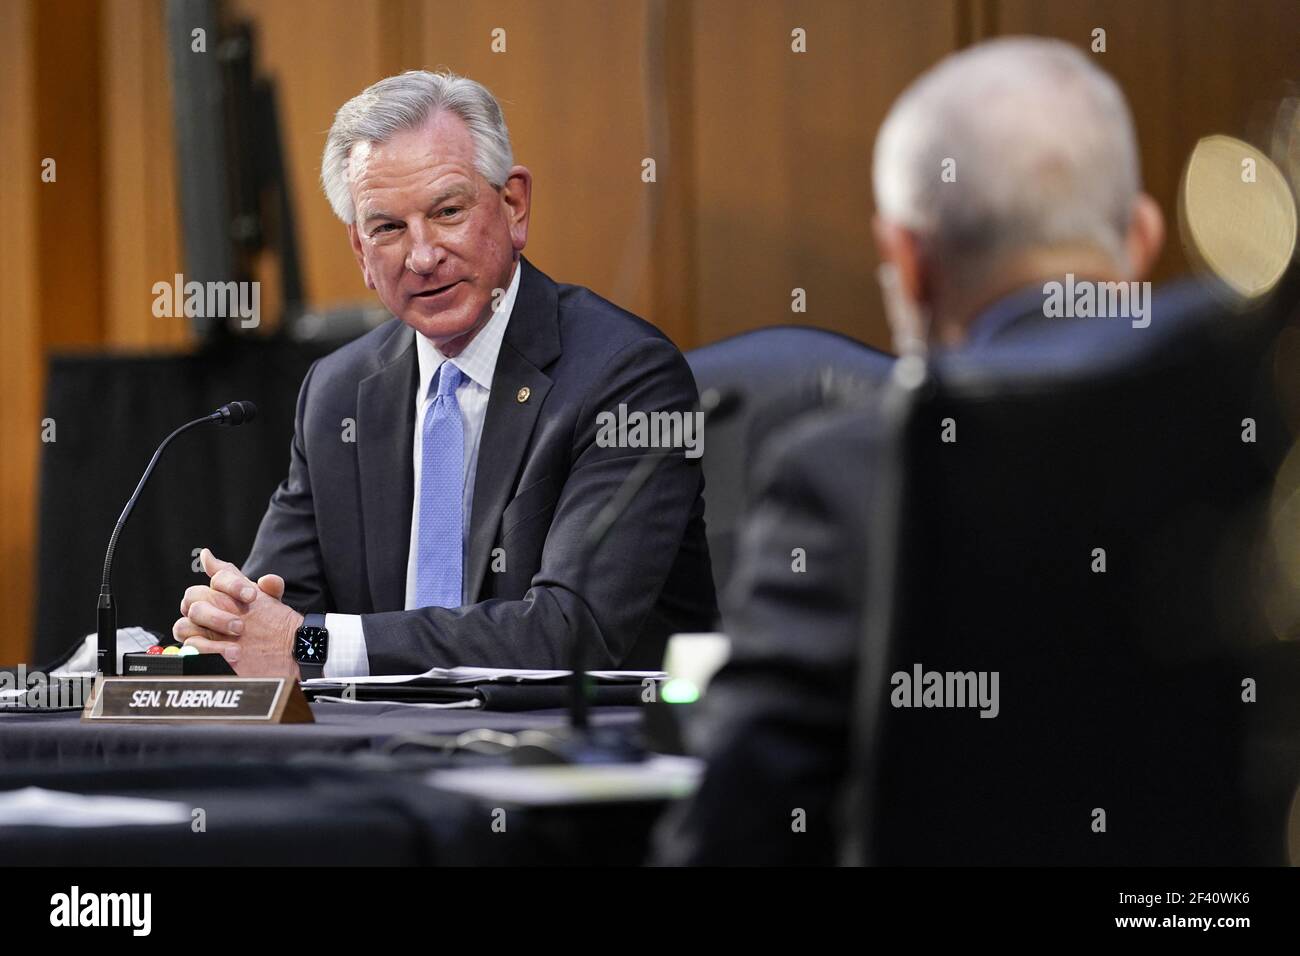 Sen. Tommy Tuberville, R-Ala., speaks during a Senate Health, Education, Labor and Pensions Committee hearing on the federal coronavirus response on Capitol Hill in Washington, Thursday, March 18, 2021. (AP Photo/Susan Walsh, Pool) Photo by Anna Moneymaker/Pool/ABACAPRESS.COM Stock Photo